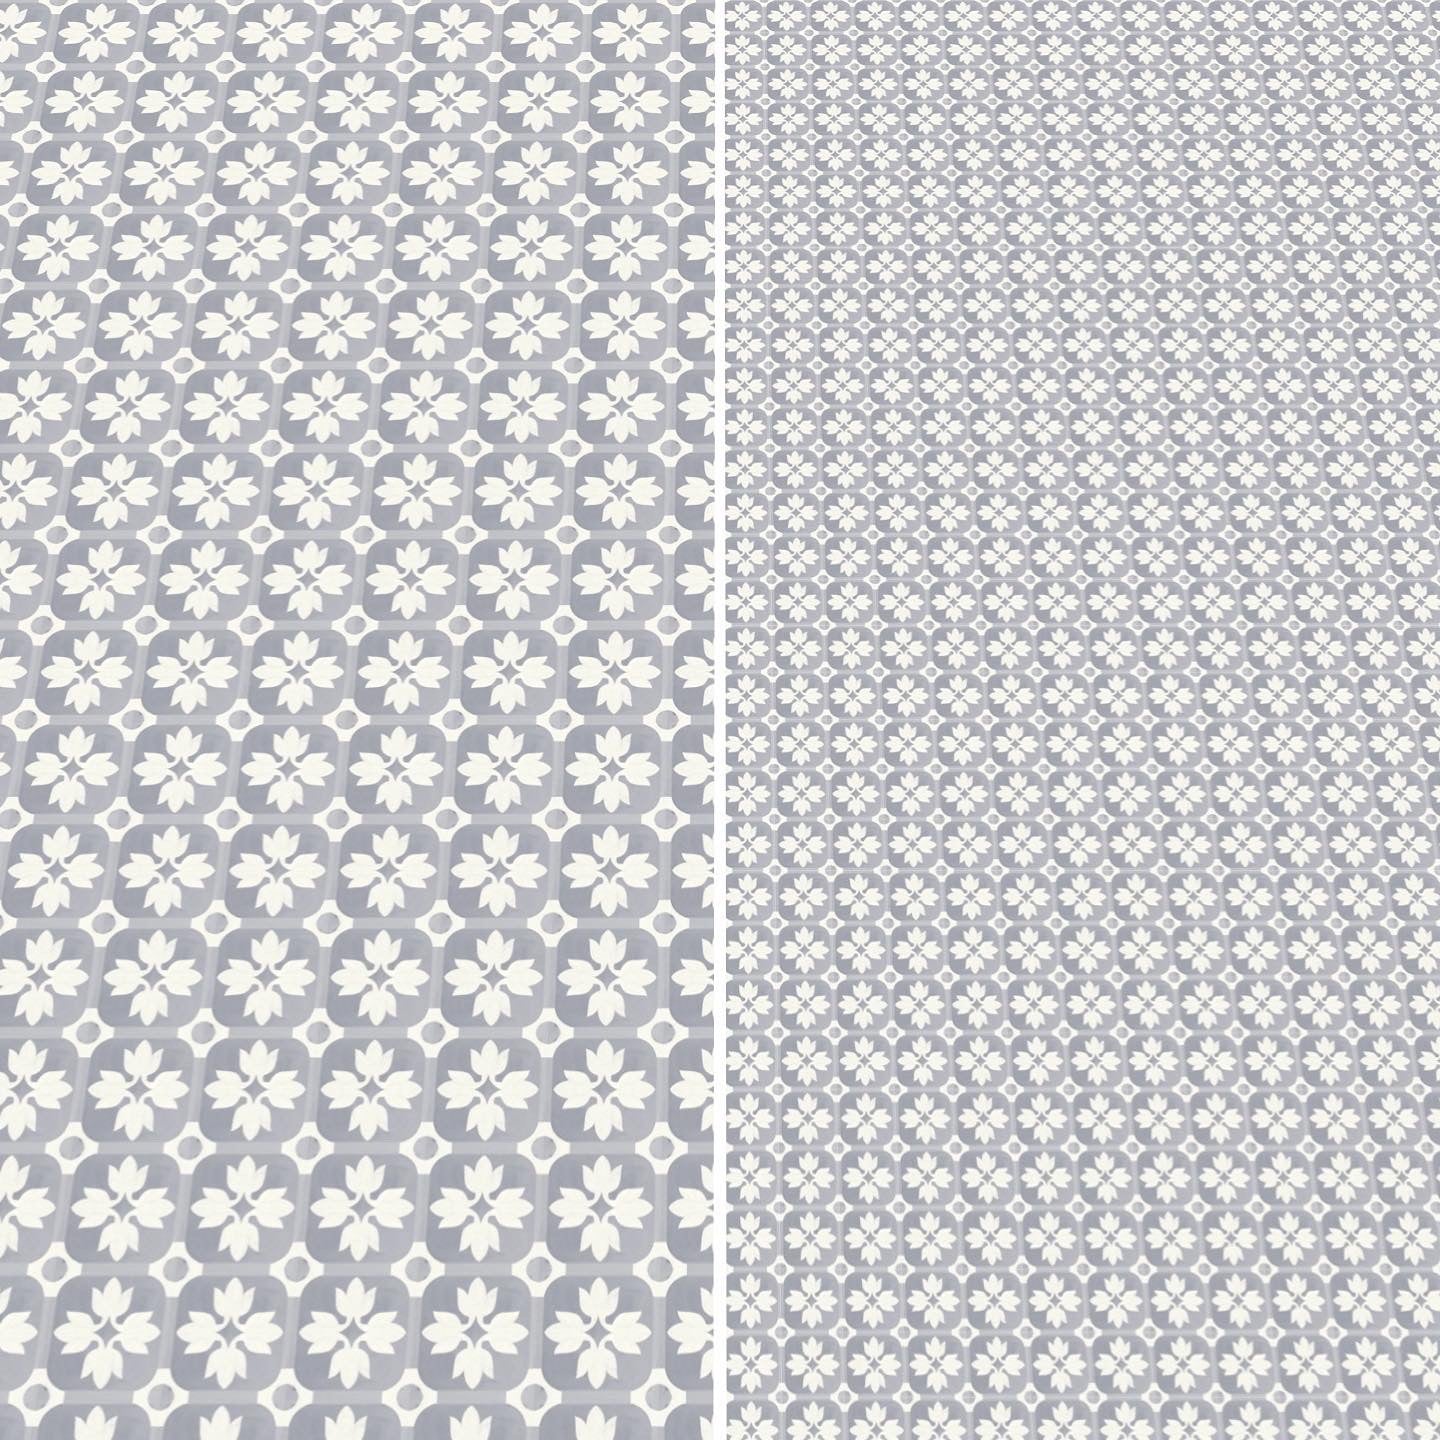 Grey and White Flower Paper Tile